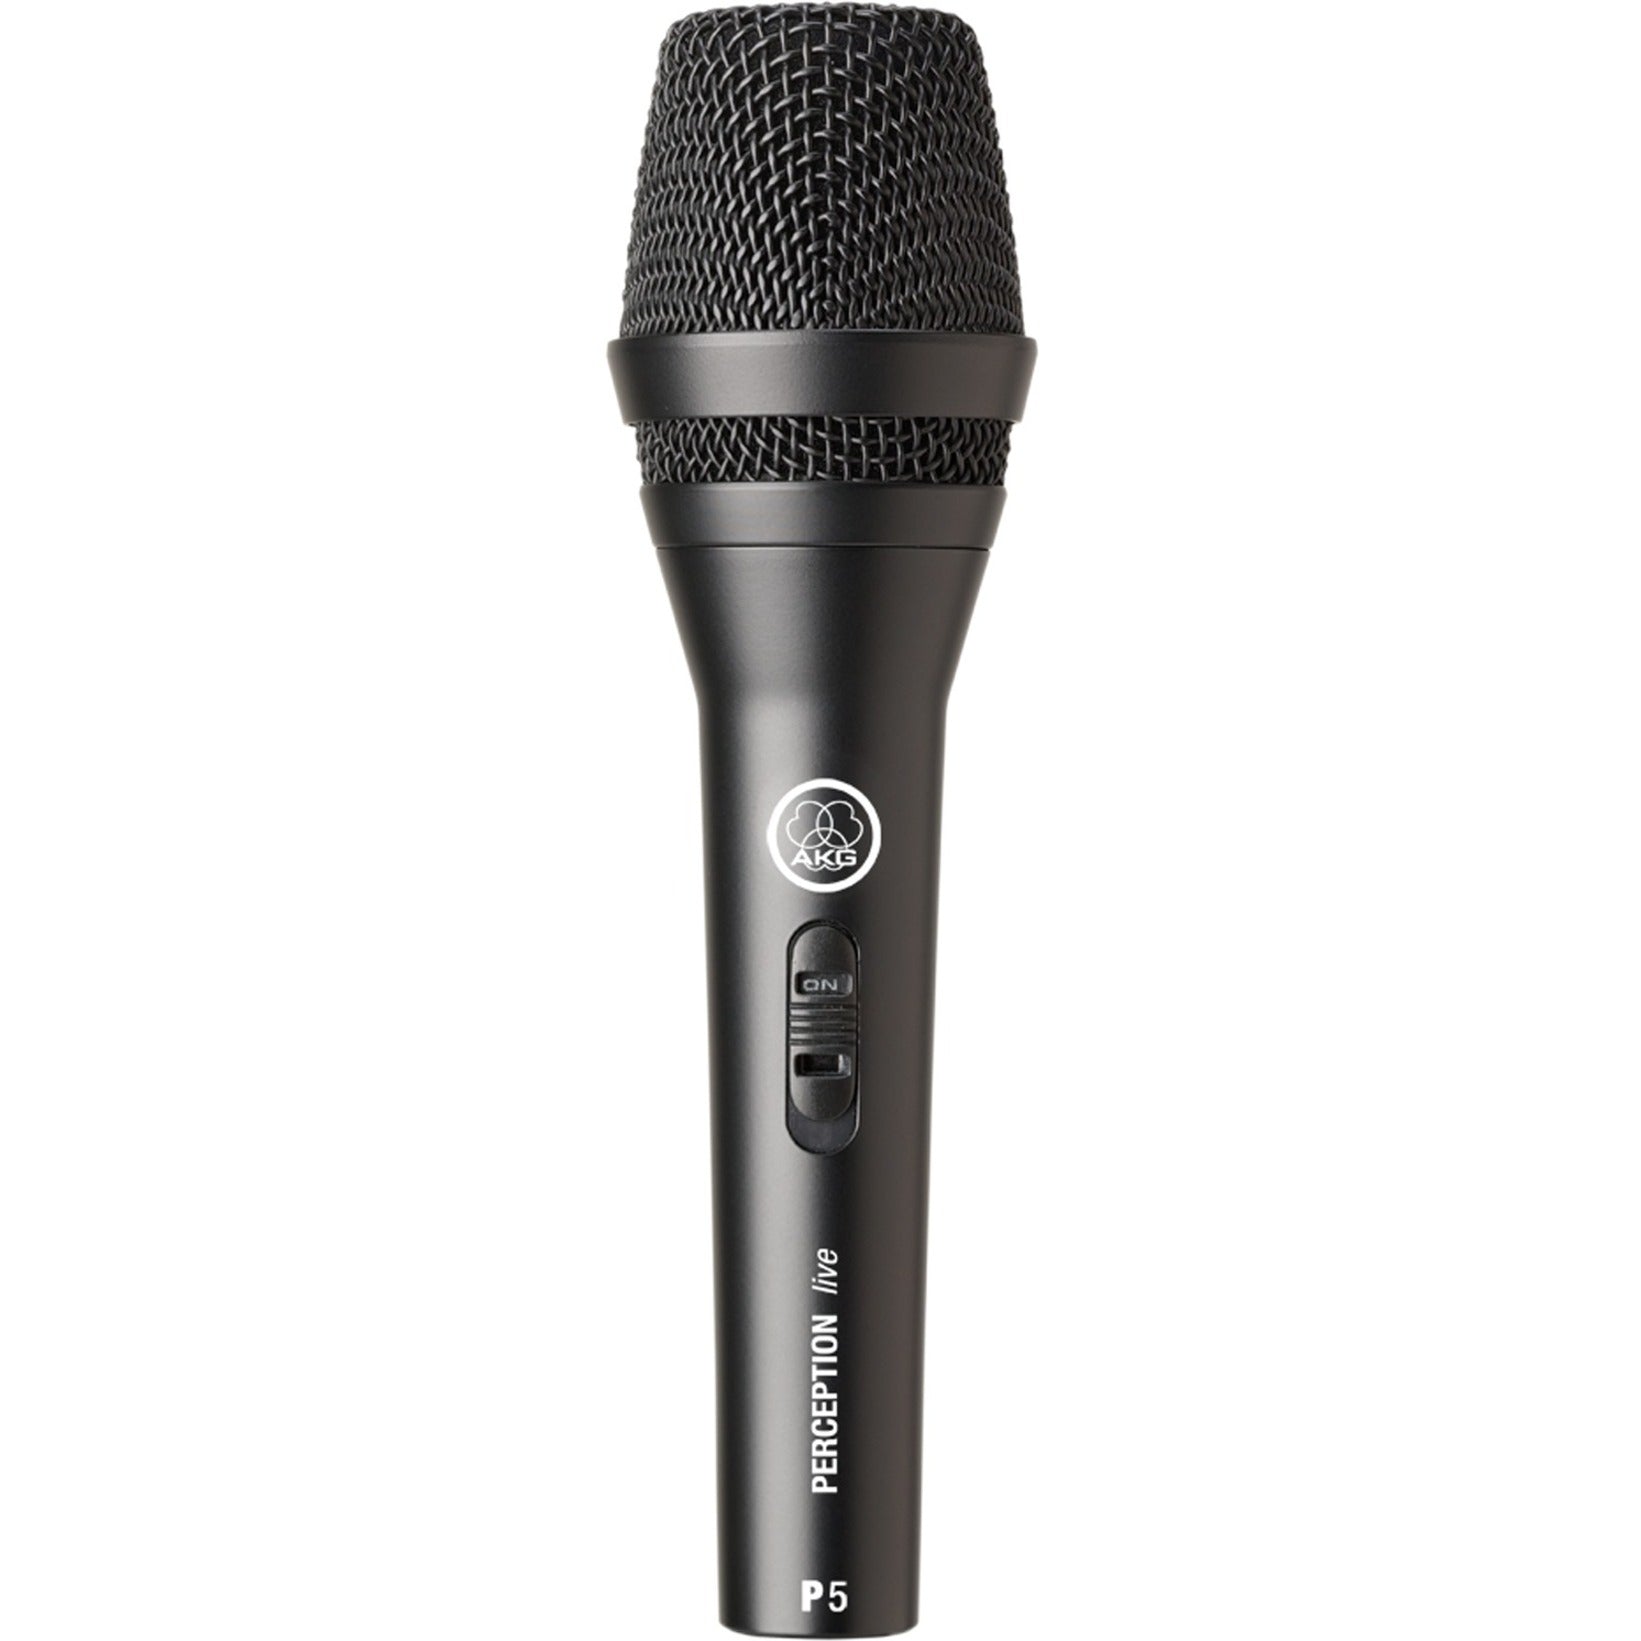 AKG 3100H00120 P5 S High-Performance Dynamic Vocal Microphone With On/Off Switch, Super-cardioid, Shock Mount, Wired